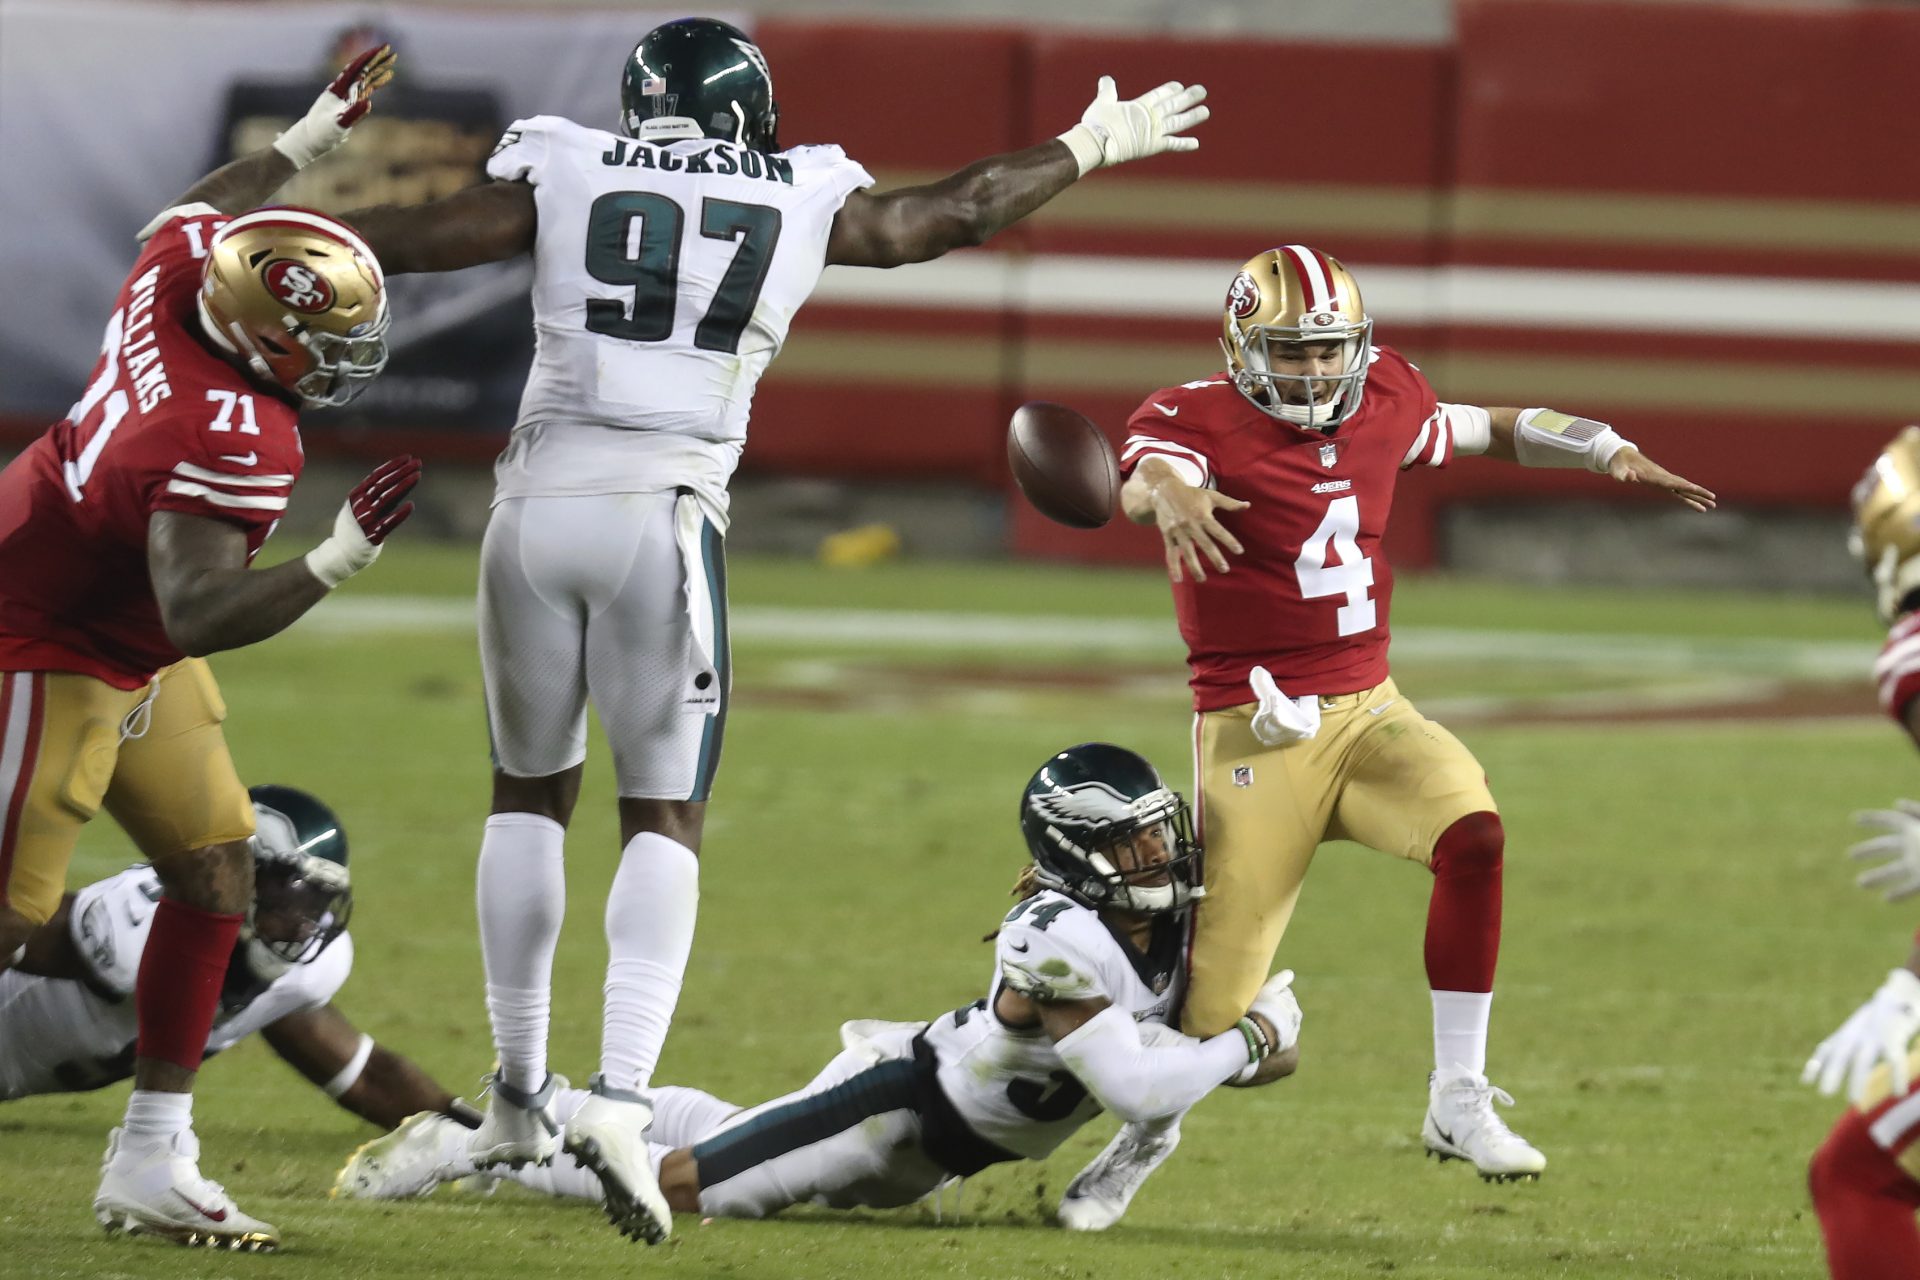 San Francisco 49ers quarterback Nick Mullens (4) fumbles the ball as he runs from Philadelphia Eagles cornerback Cre'von LeBlanc, bottom, which was recovered by defensive tackle Malik Jackson (97), during the second half of an NFL football game in Santa Clara, Calif., Sunday, Oct. 4, 2020.